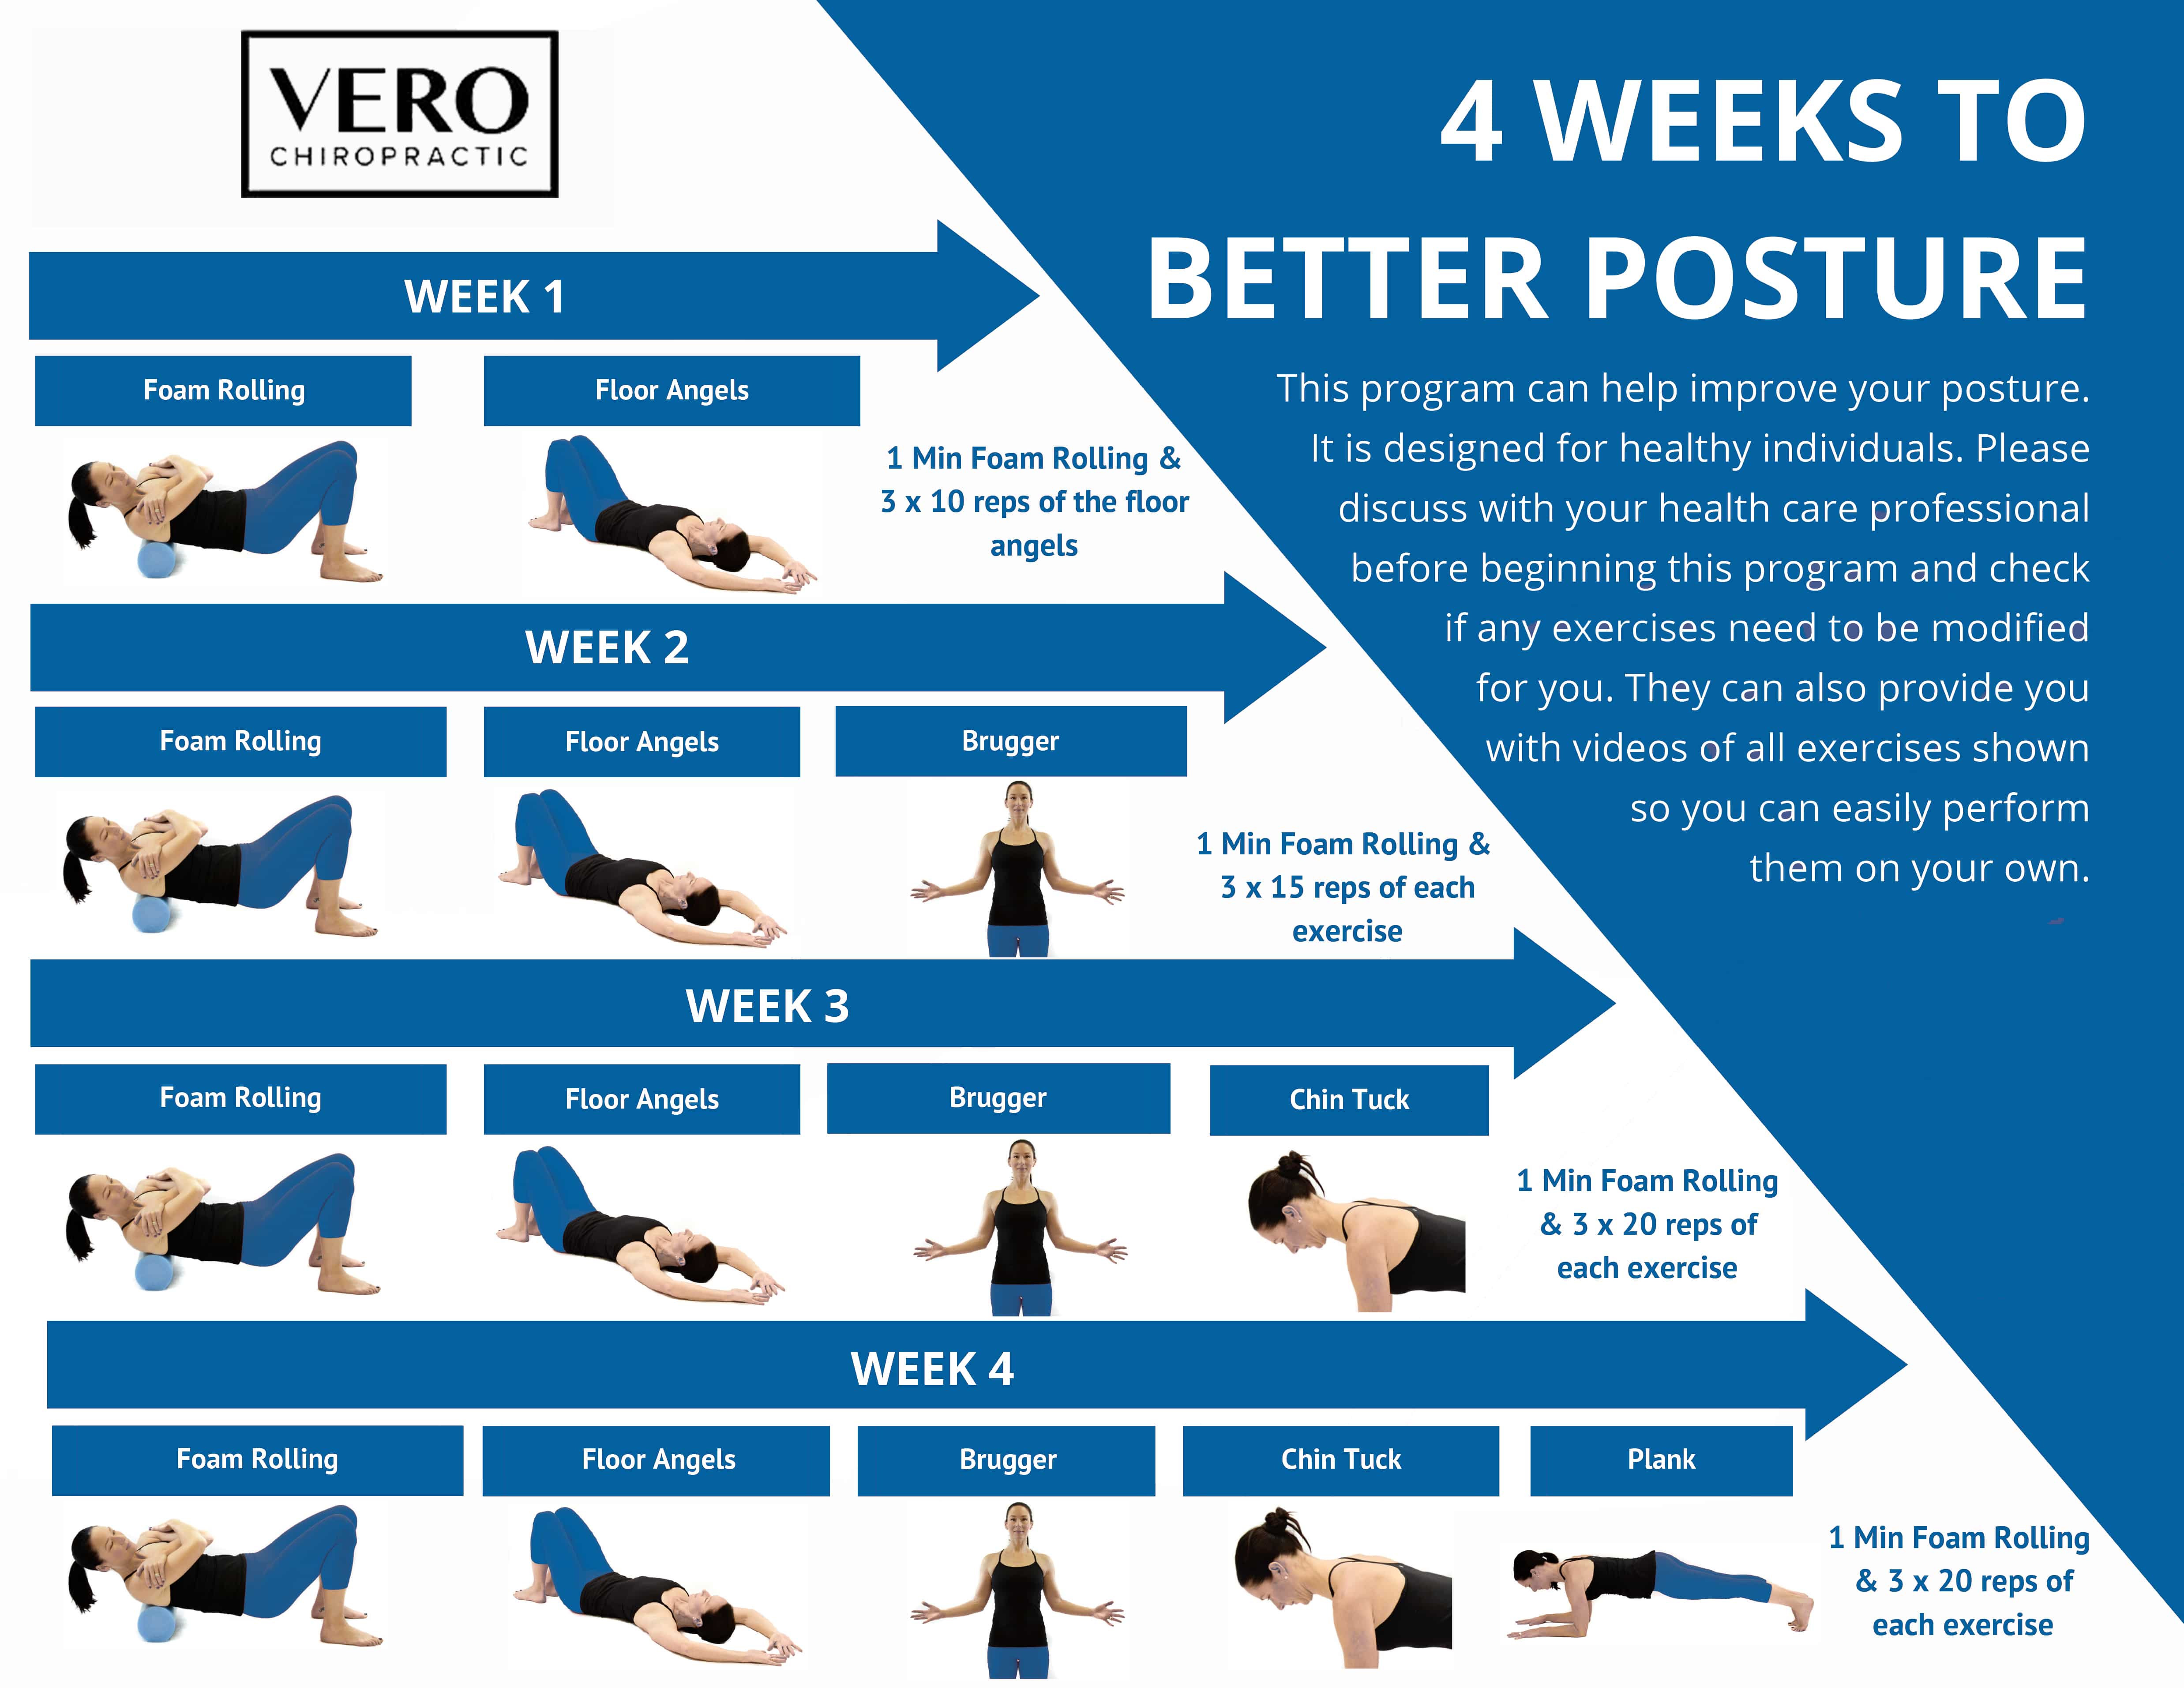 How To Improve Your Posture In 4 Weeks - Vero Health Center